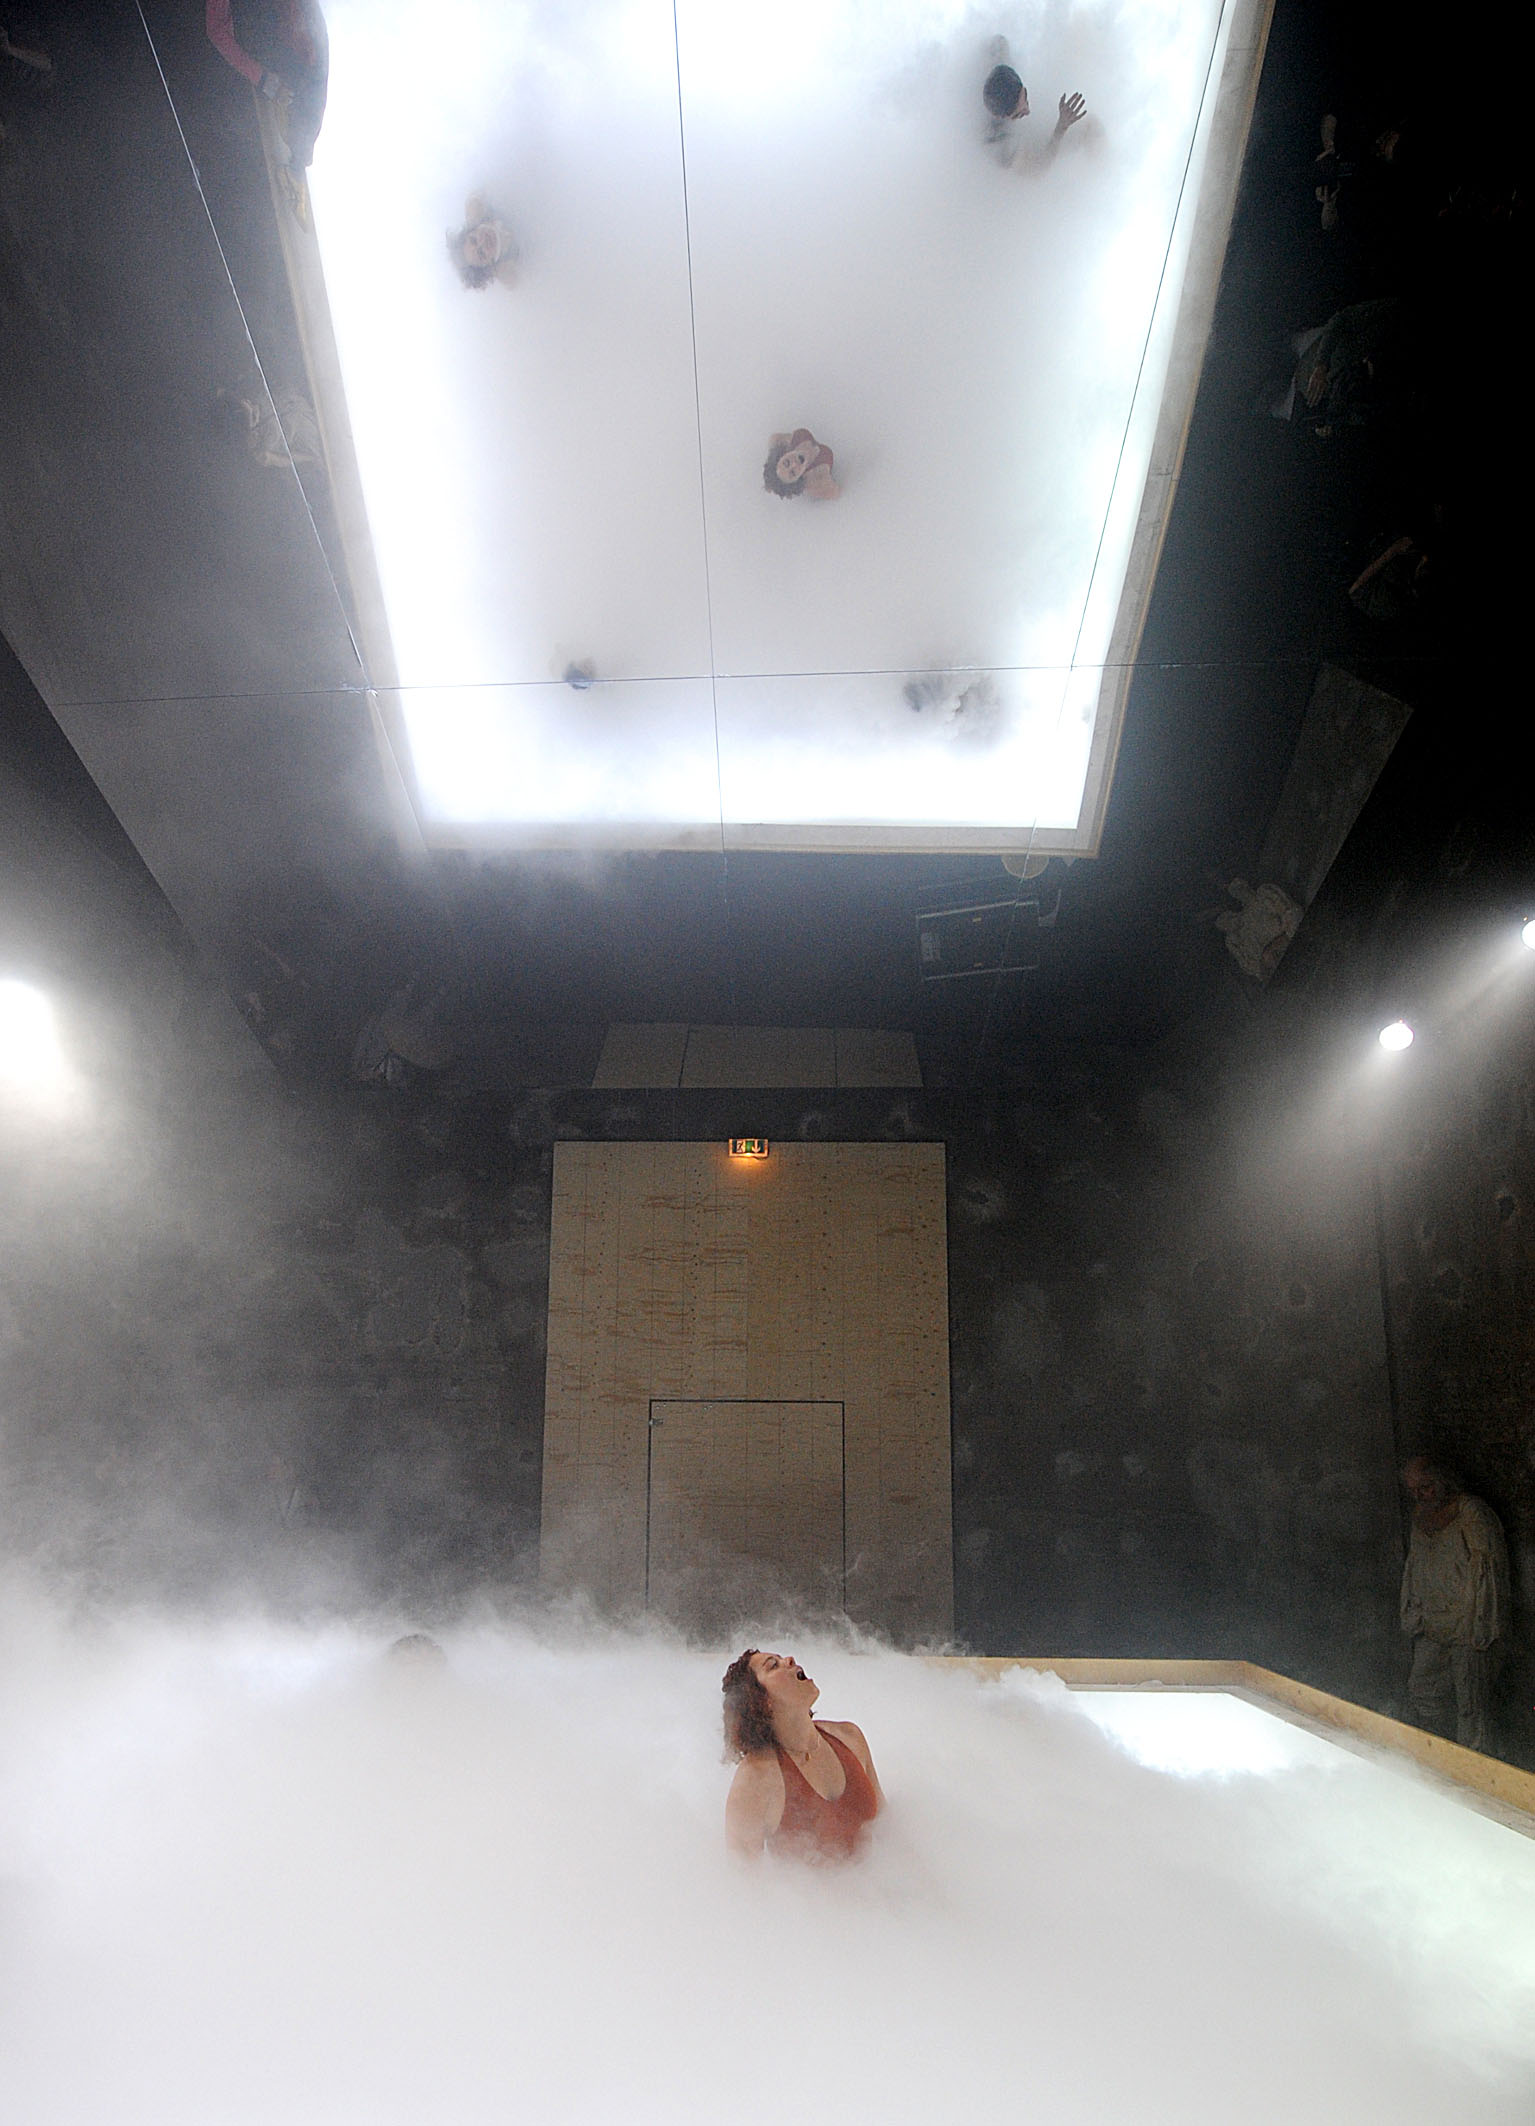 A large room with a mirror for a ceiling. A performer is seen emerging from a large box filled with dry ice and the heads of other performers appear in the reflection of the mirror.